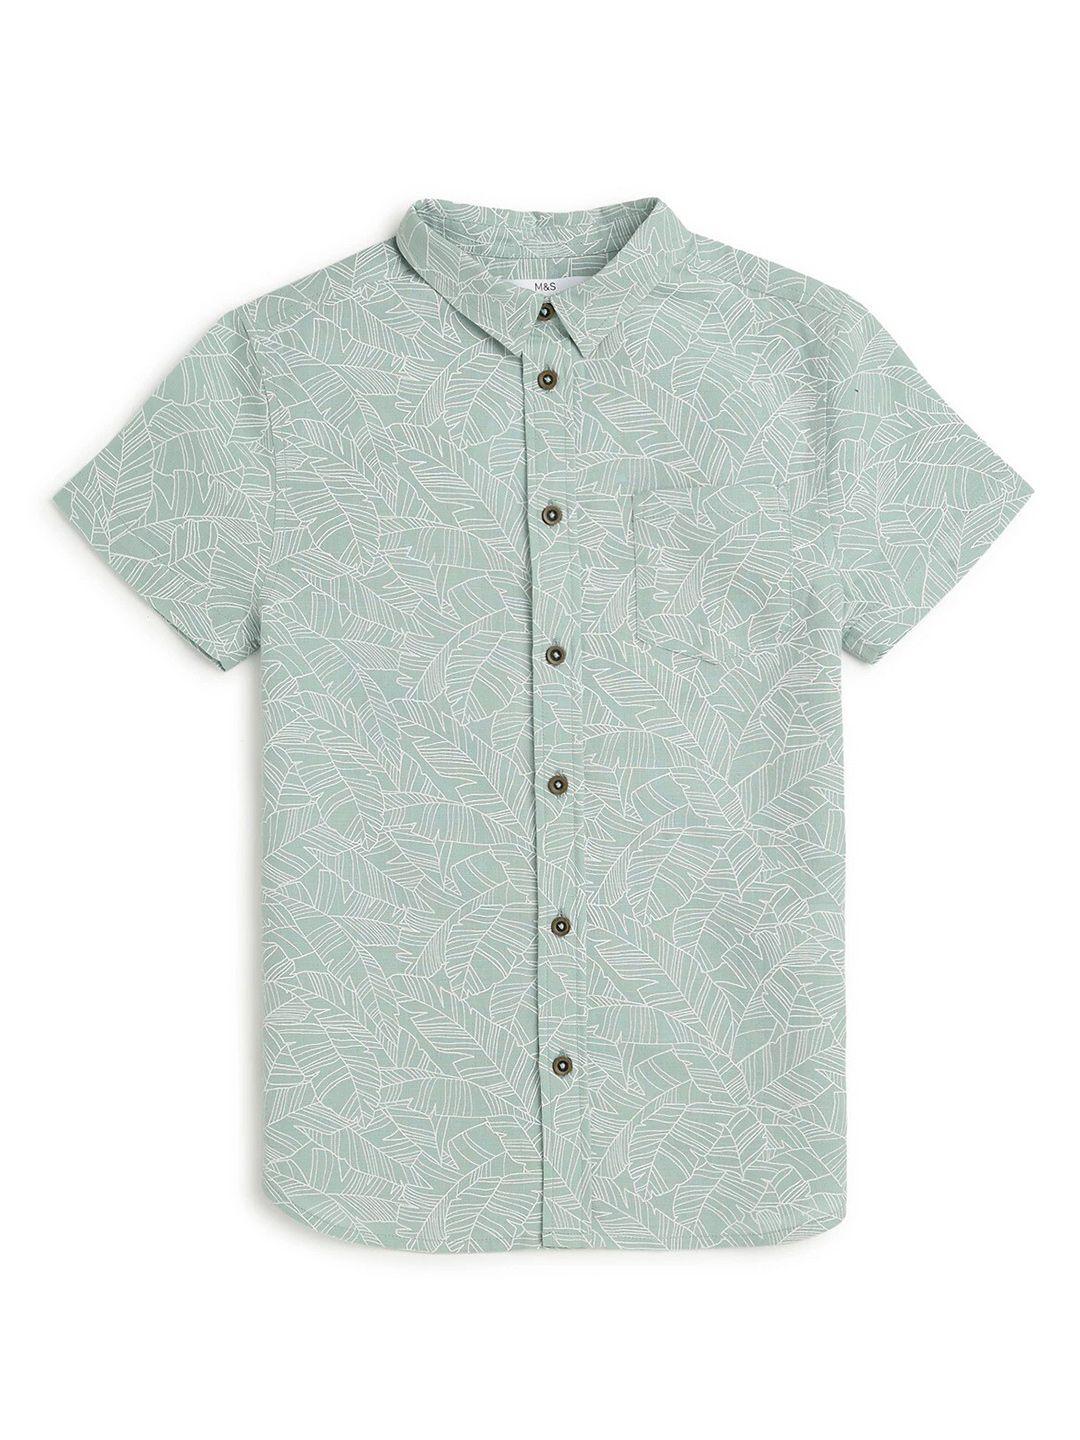 marks & spencer boys floral printed casual shirt